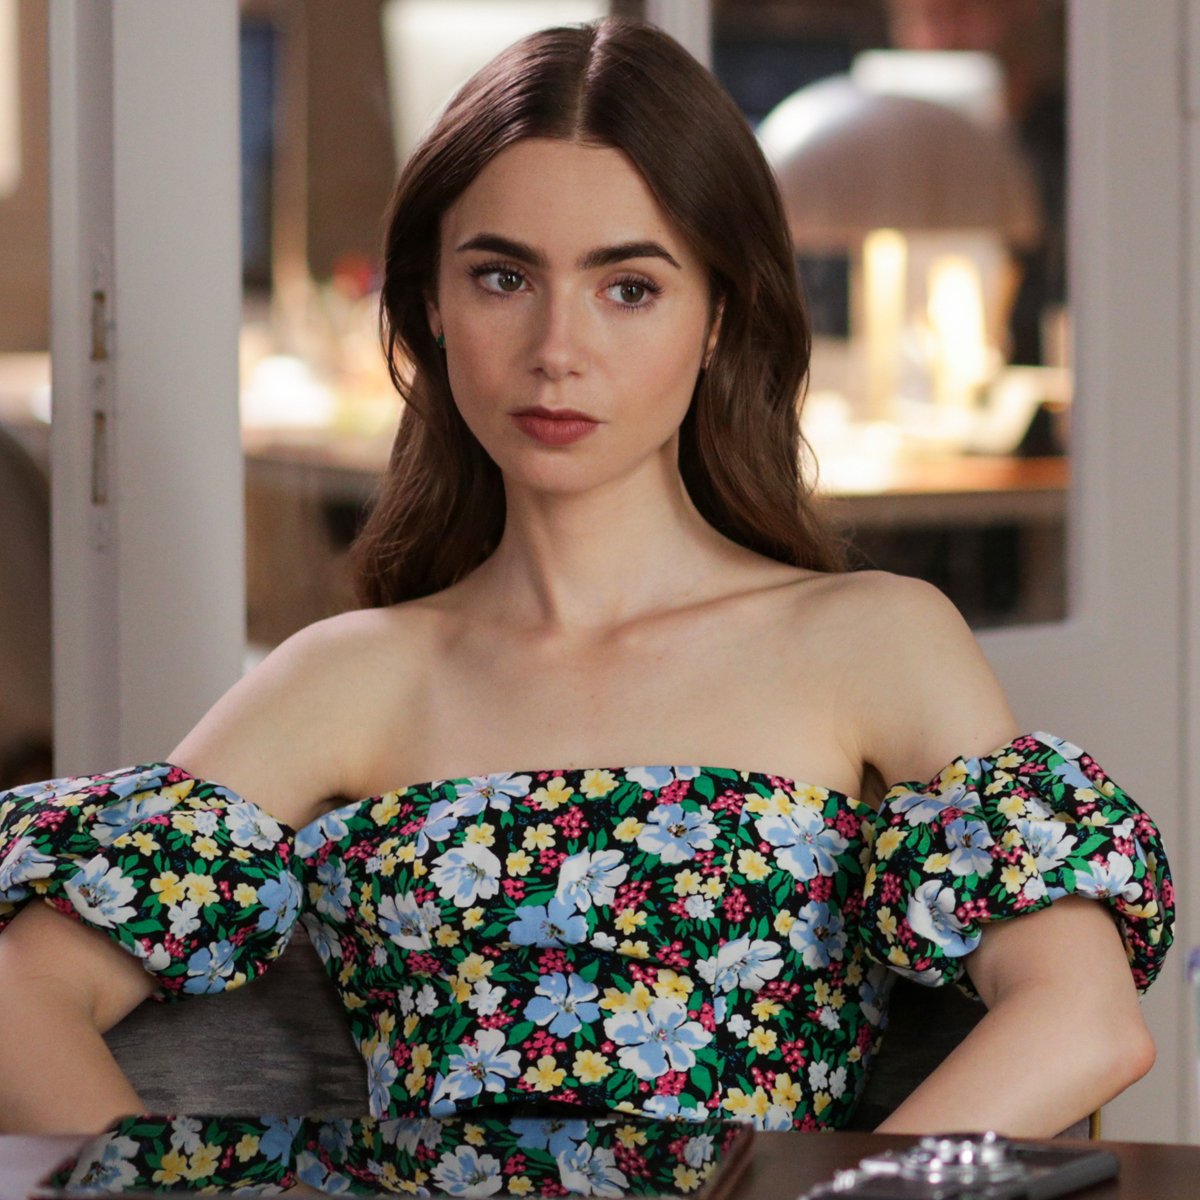 10 Looks to Copy from 'Emily in Paris' - Netflix Lily Collins Fashion Chanel